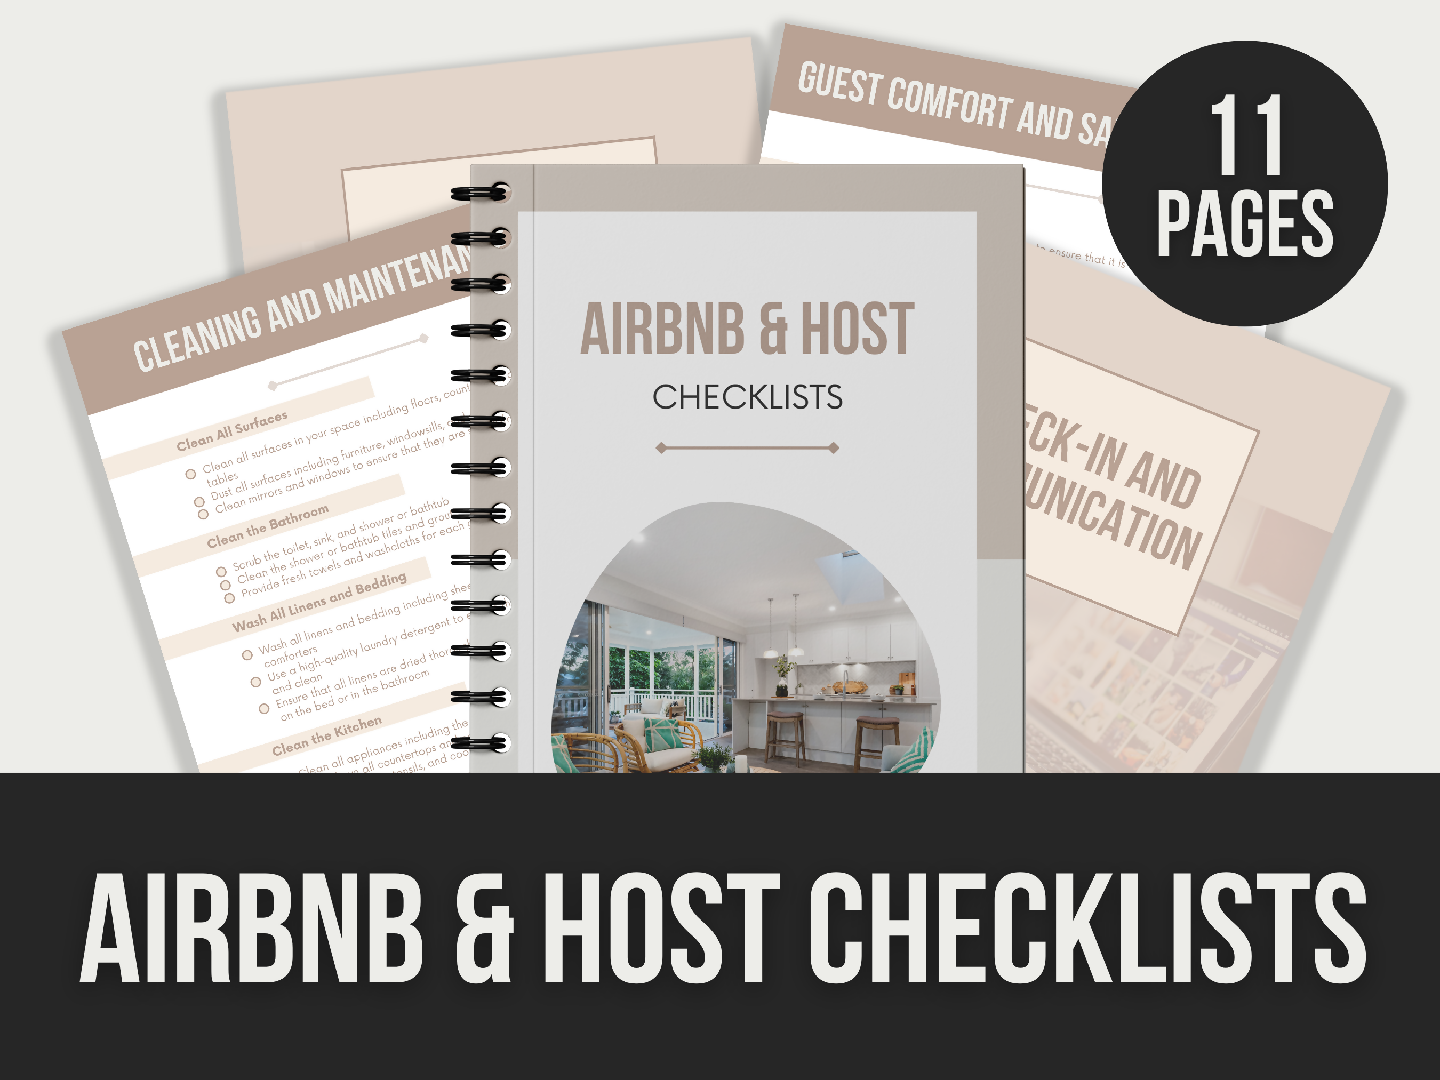 AIRBNB & HOST CHECKLISTS